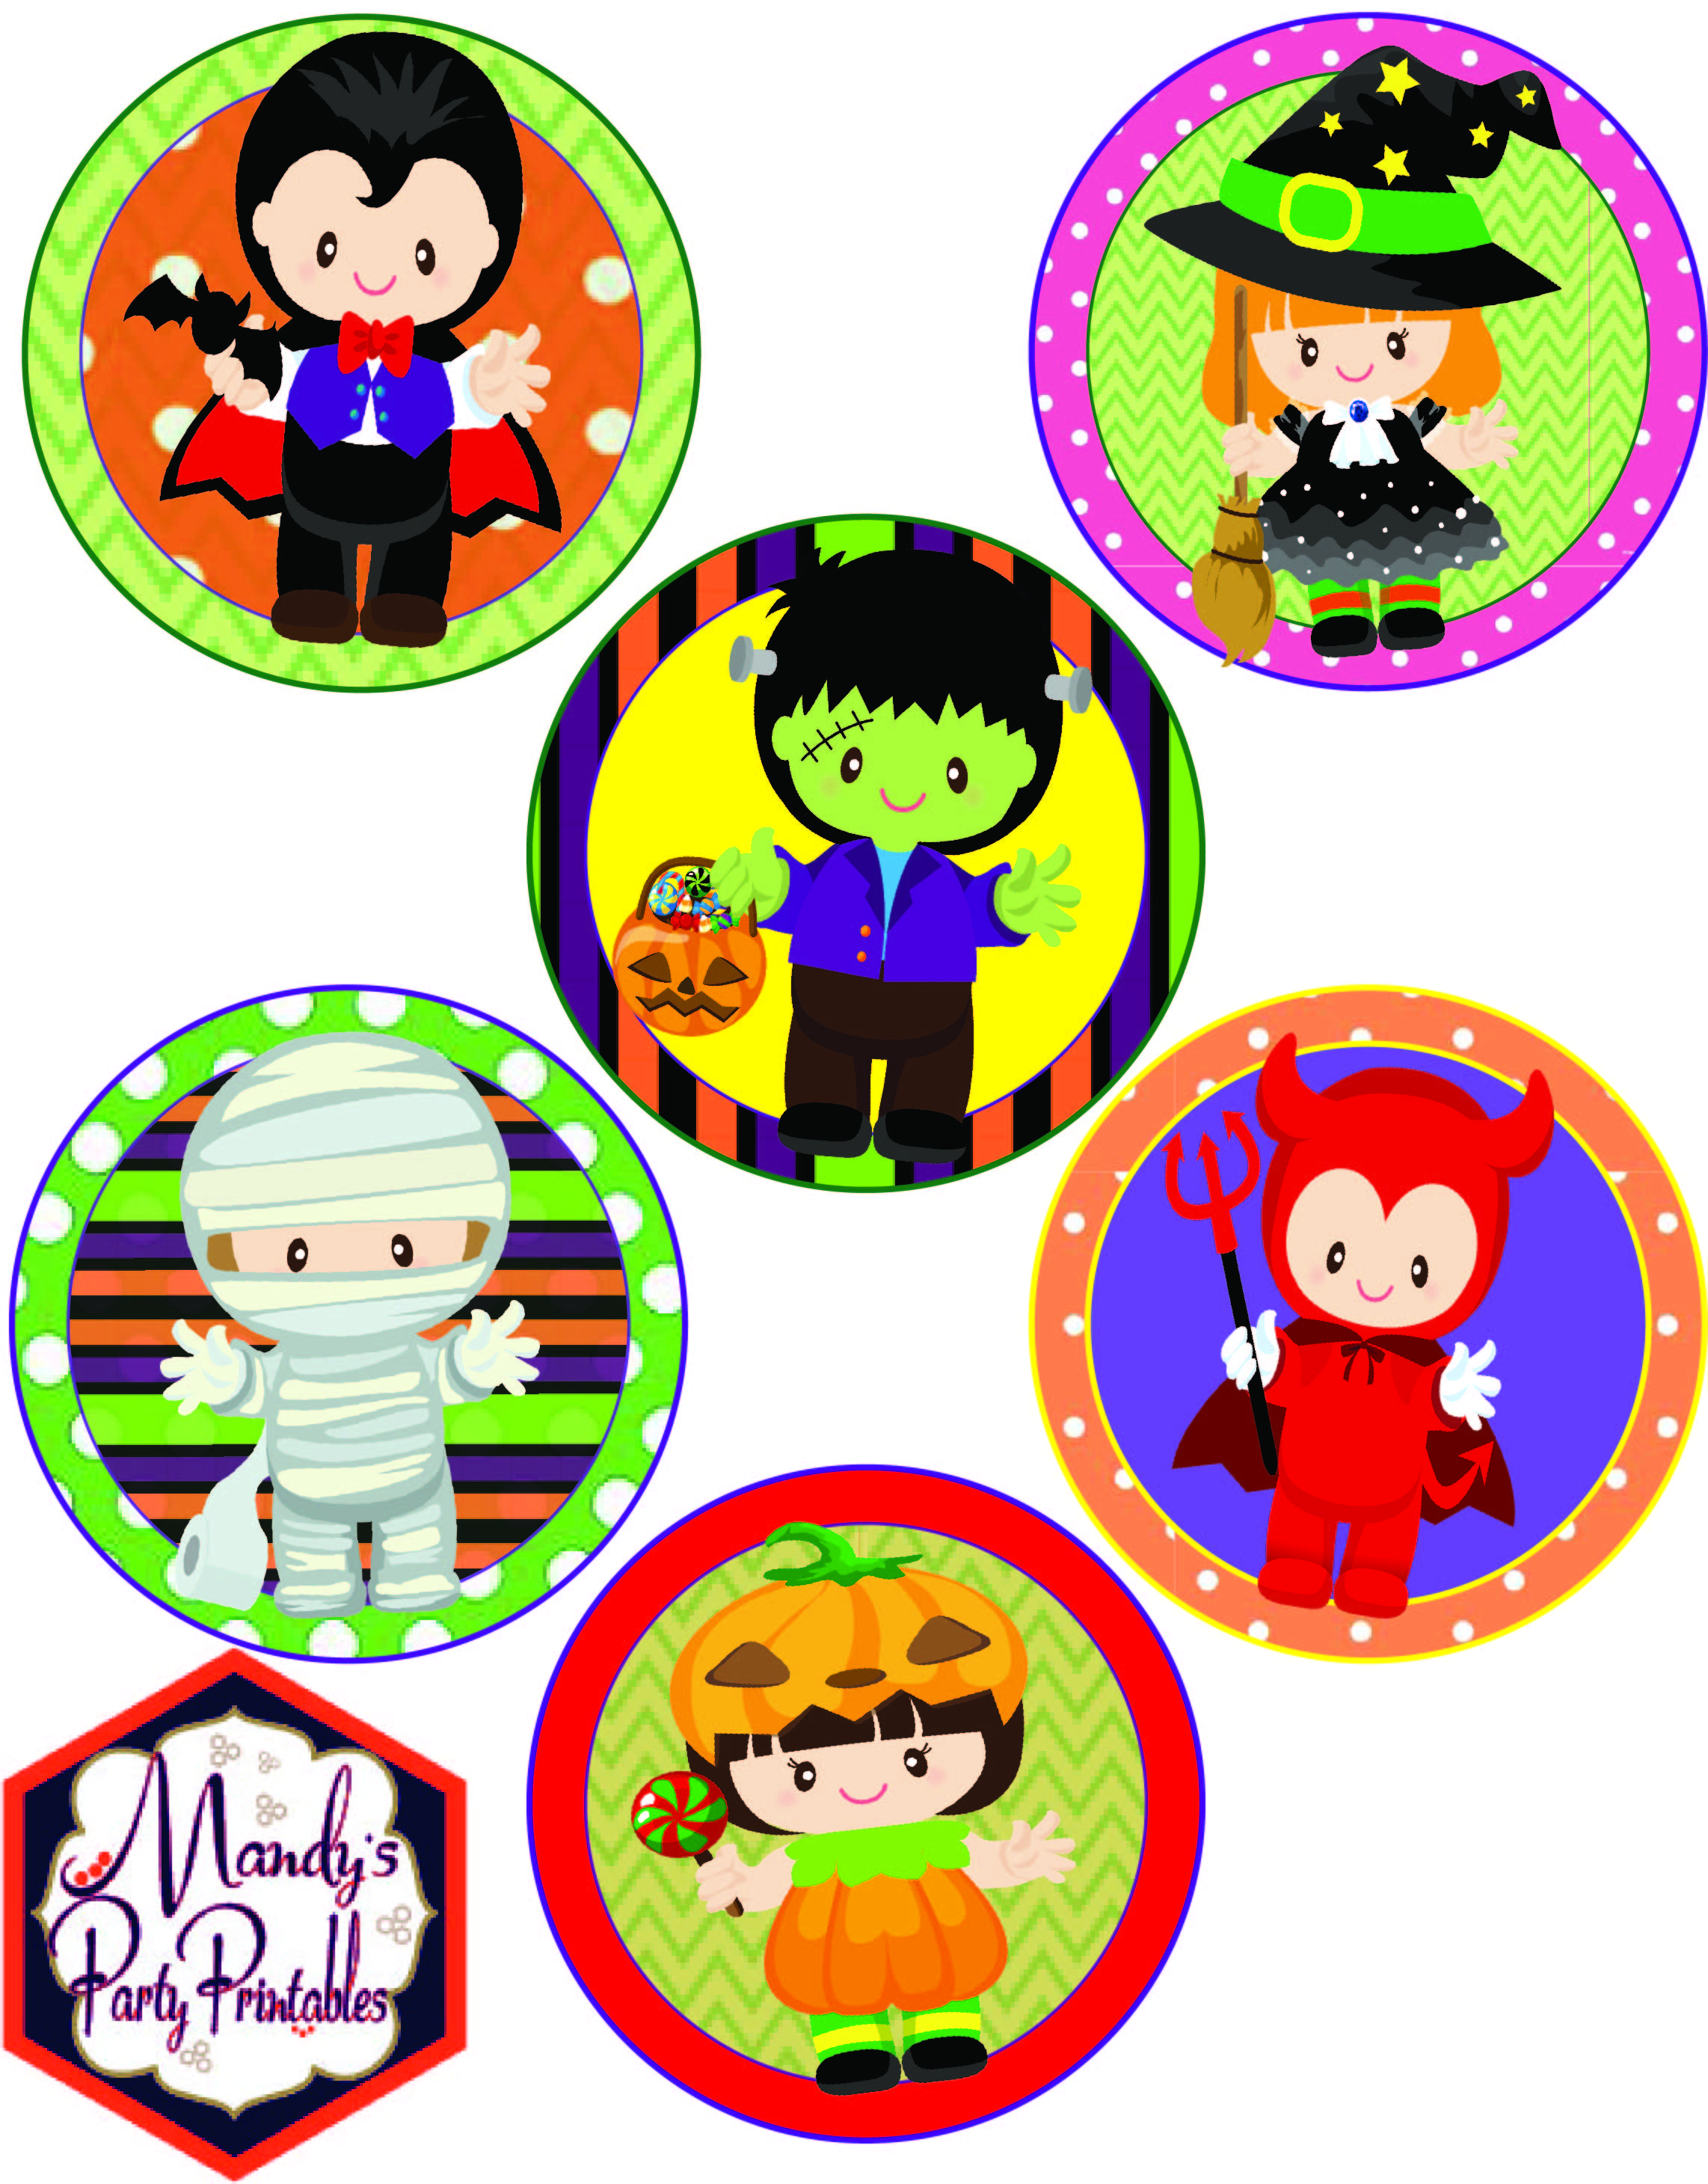 Cupcake Toppers from Halloween Costume Party Printables via Mandy's Party Printables